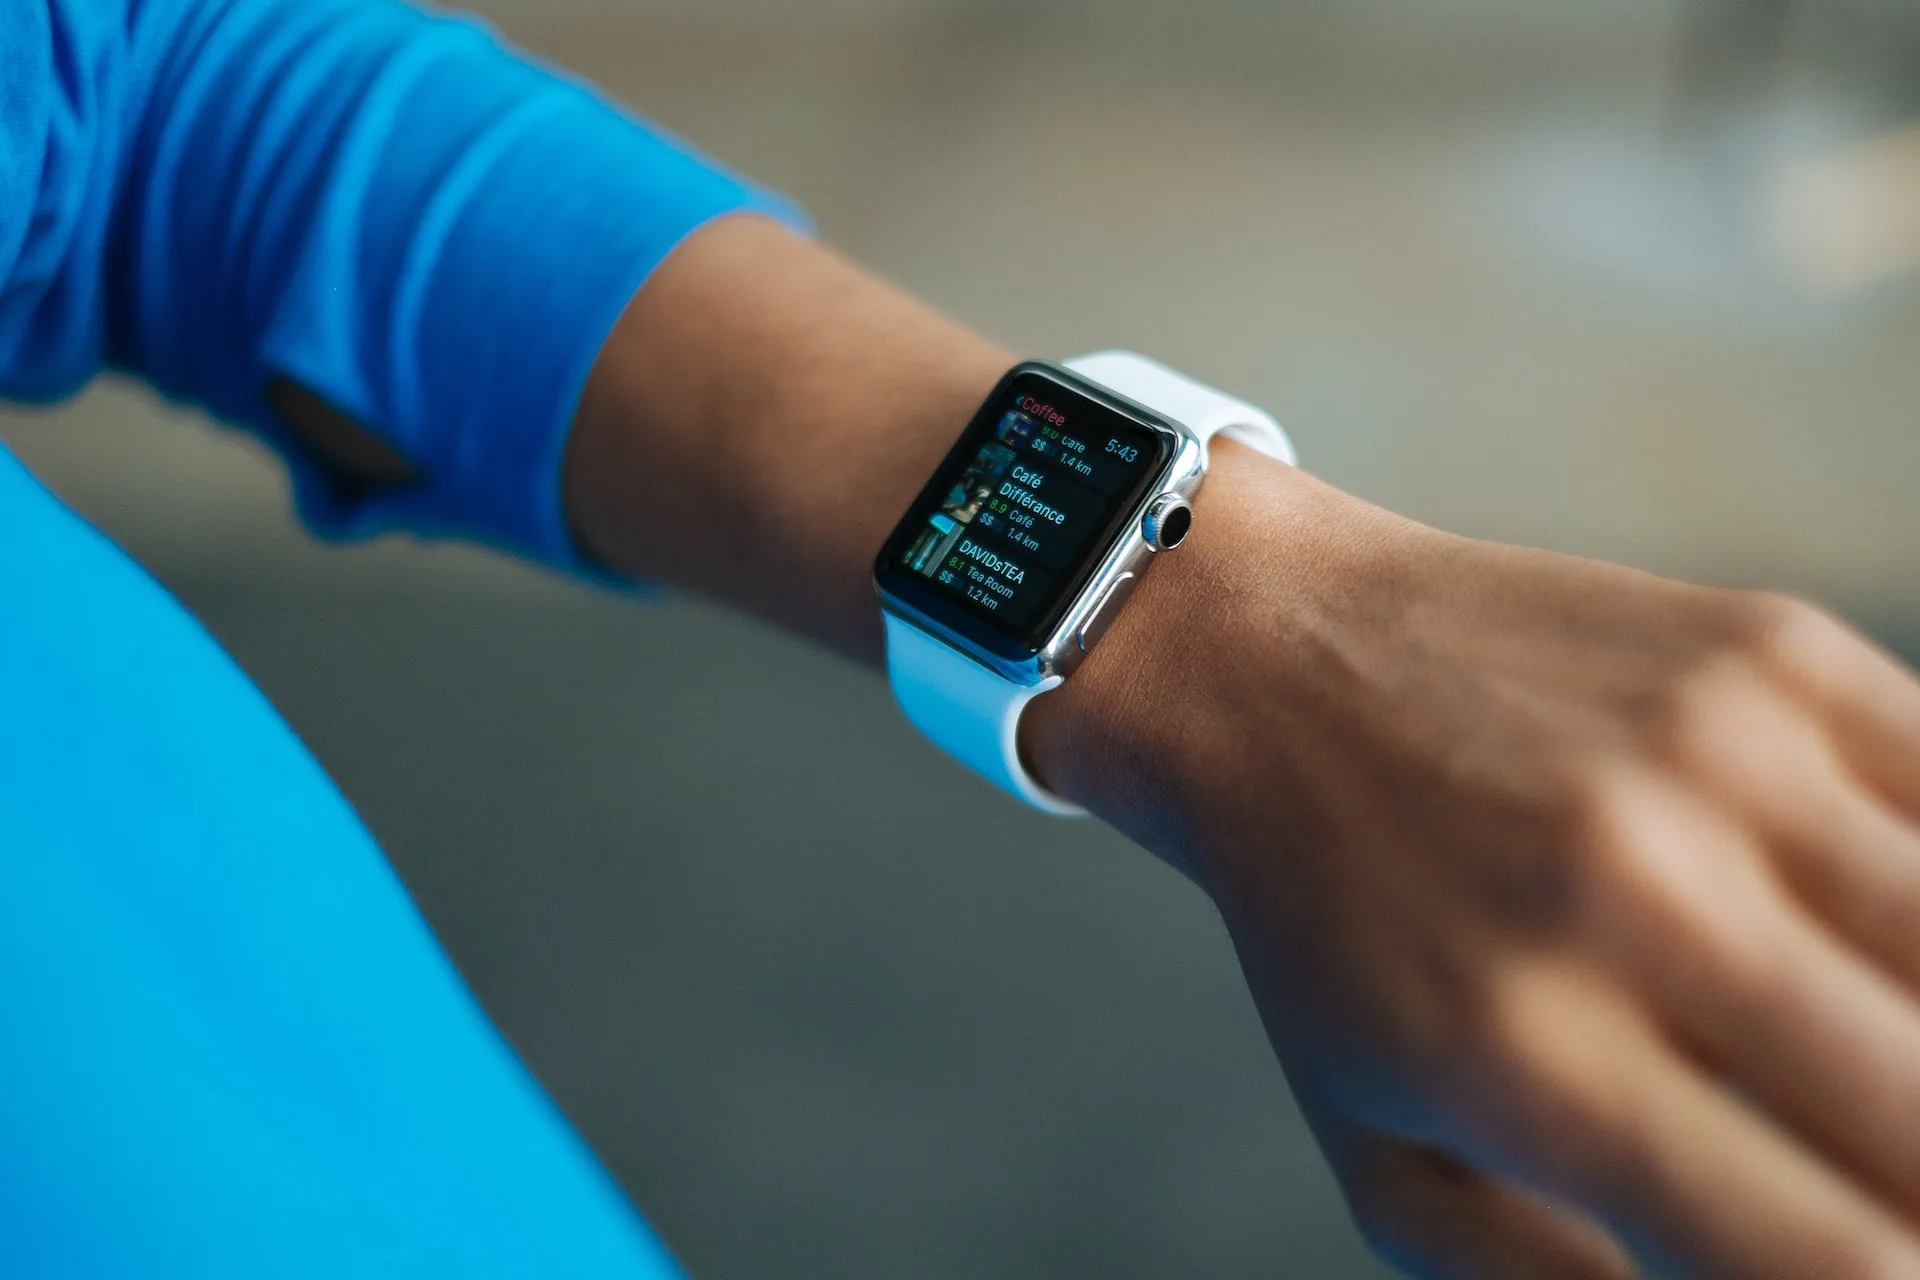 Fitness Tracker: Your Personal Assistant for Tracking Progress